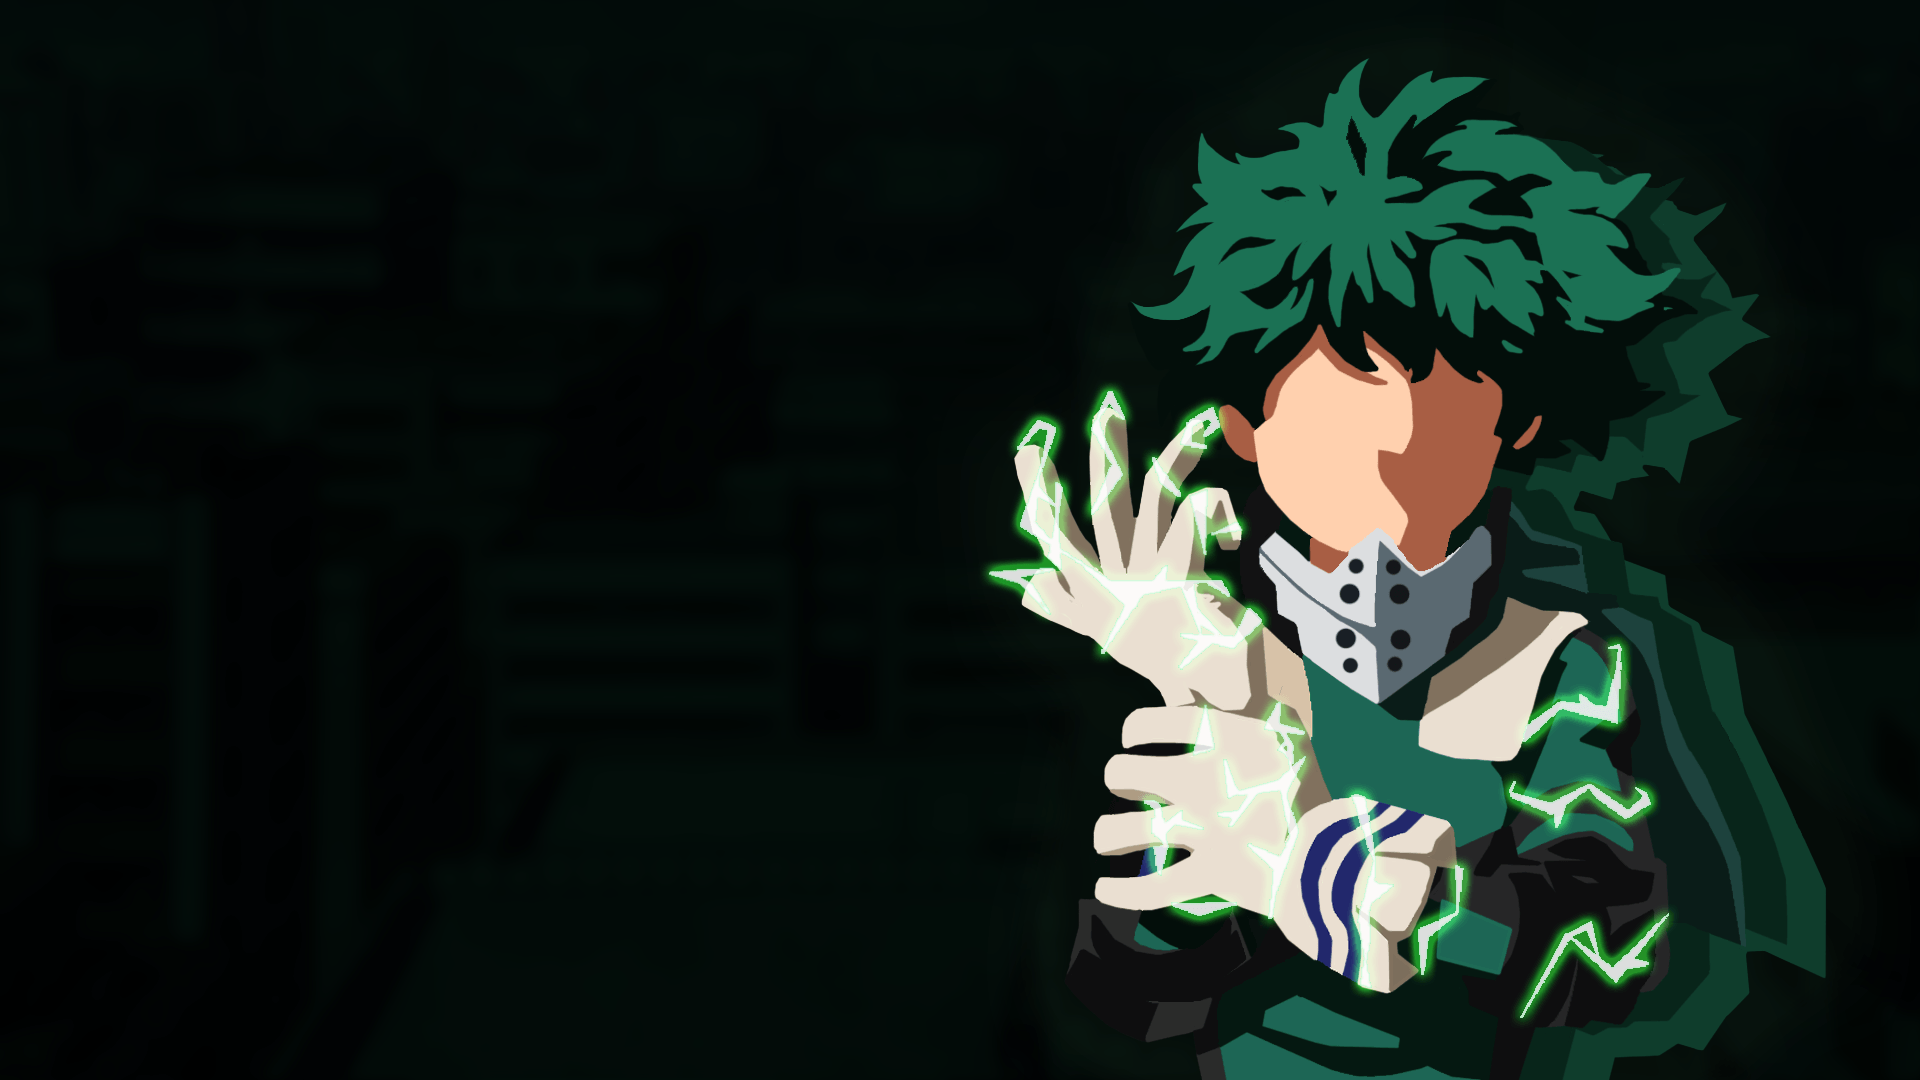 Seriously! 29+ Facts About Deku Wallpaper Desktop! Check spelling or